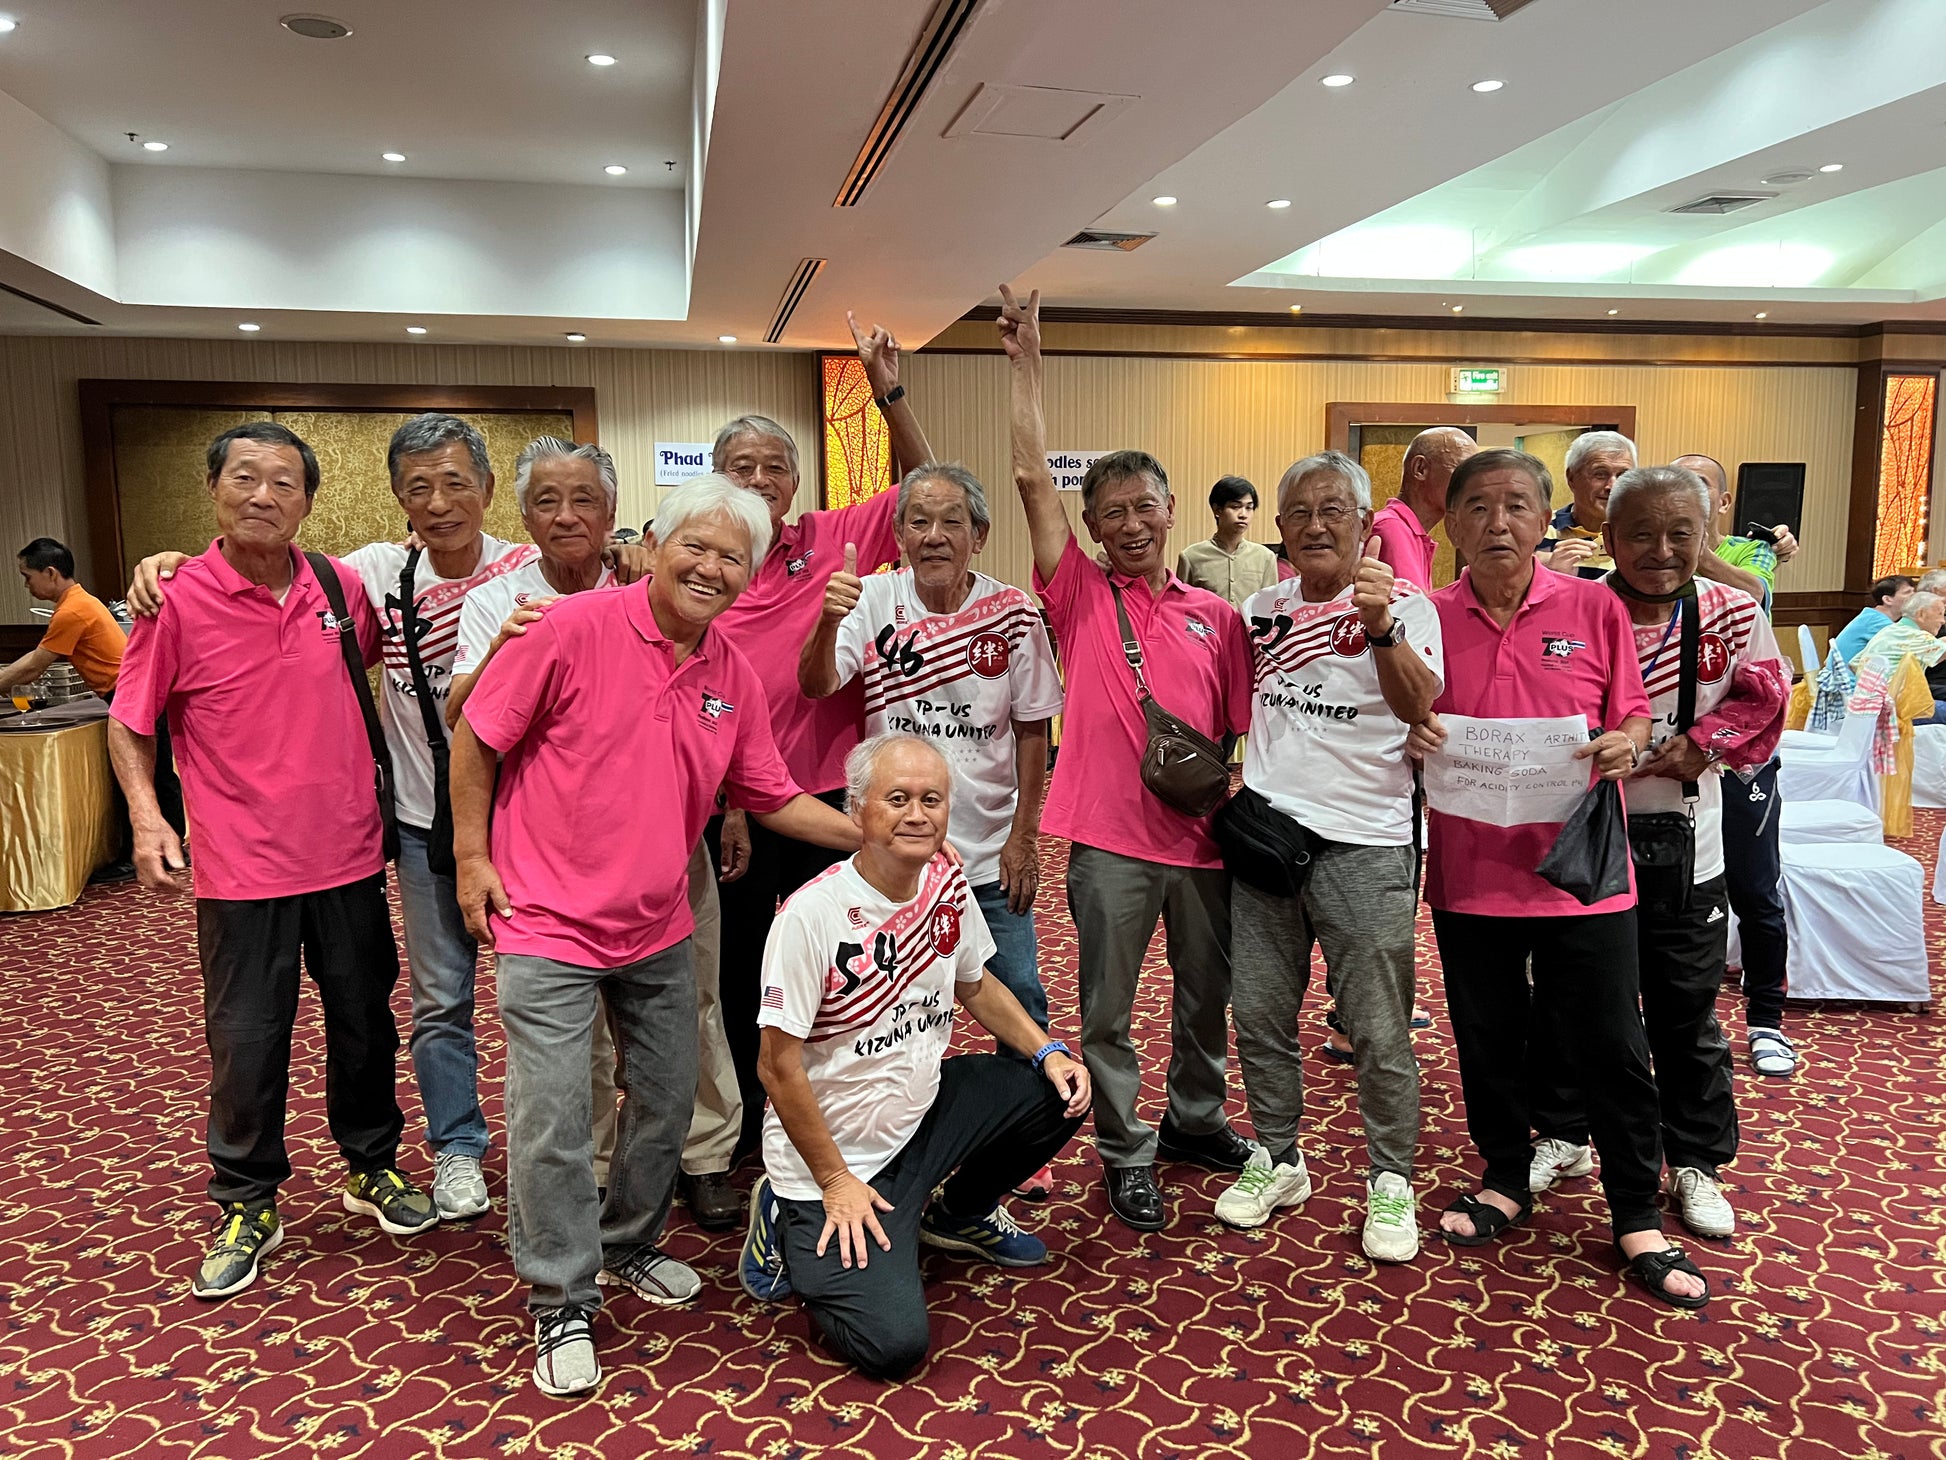 The Legends from Japan.  For over 20 years the Kizuna Club and West Japan Club have been traveling to compete in International Soccer competition worldwide.  In 2023 they participated in WorldCup70+ in beautiful Chaingmai.